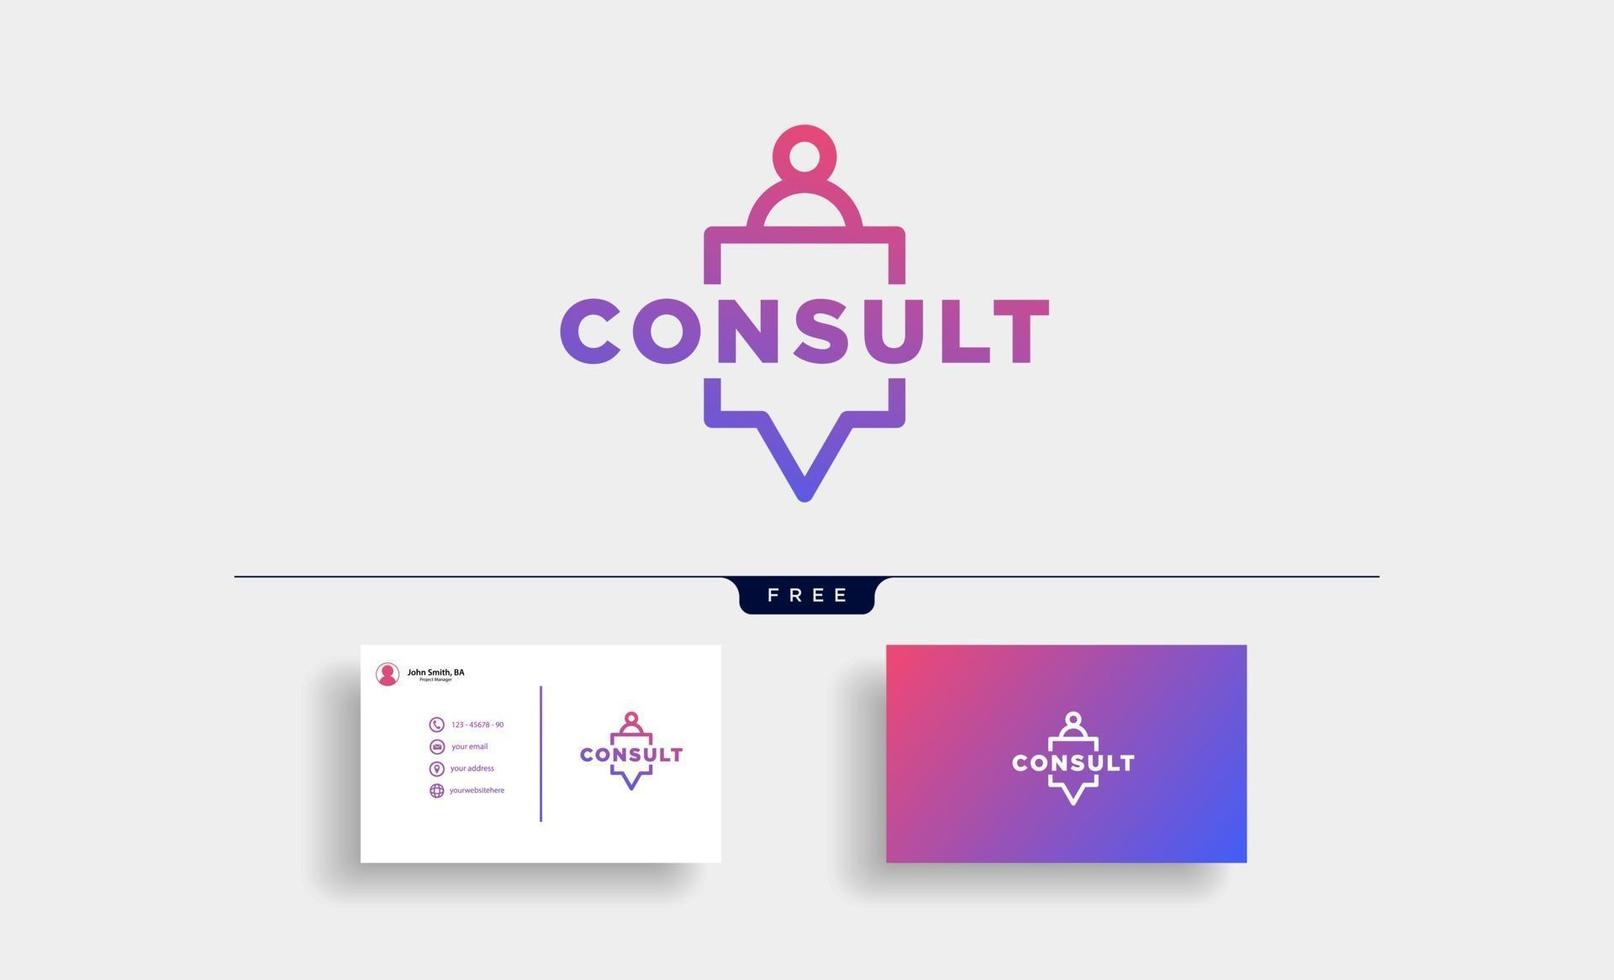 Message Communication consulting logo template with business card vector illustration icon elements isolated